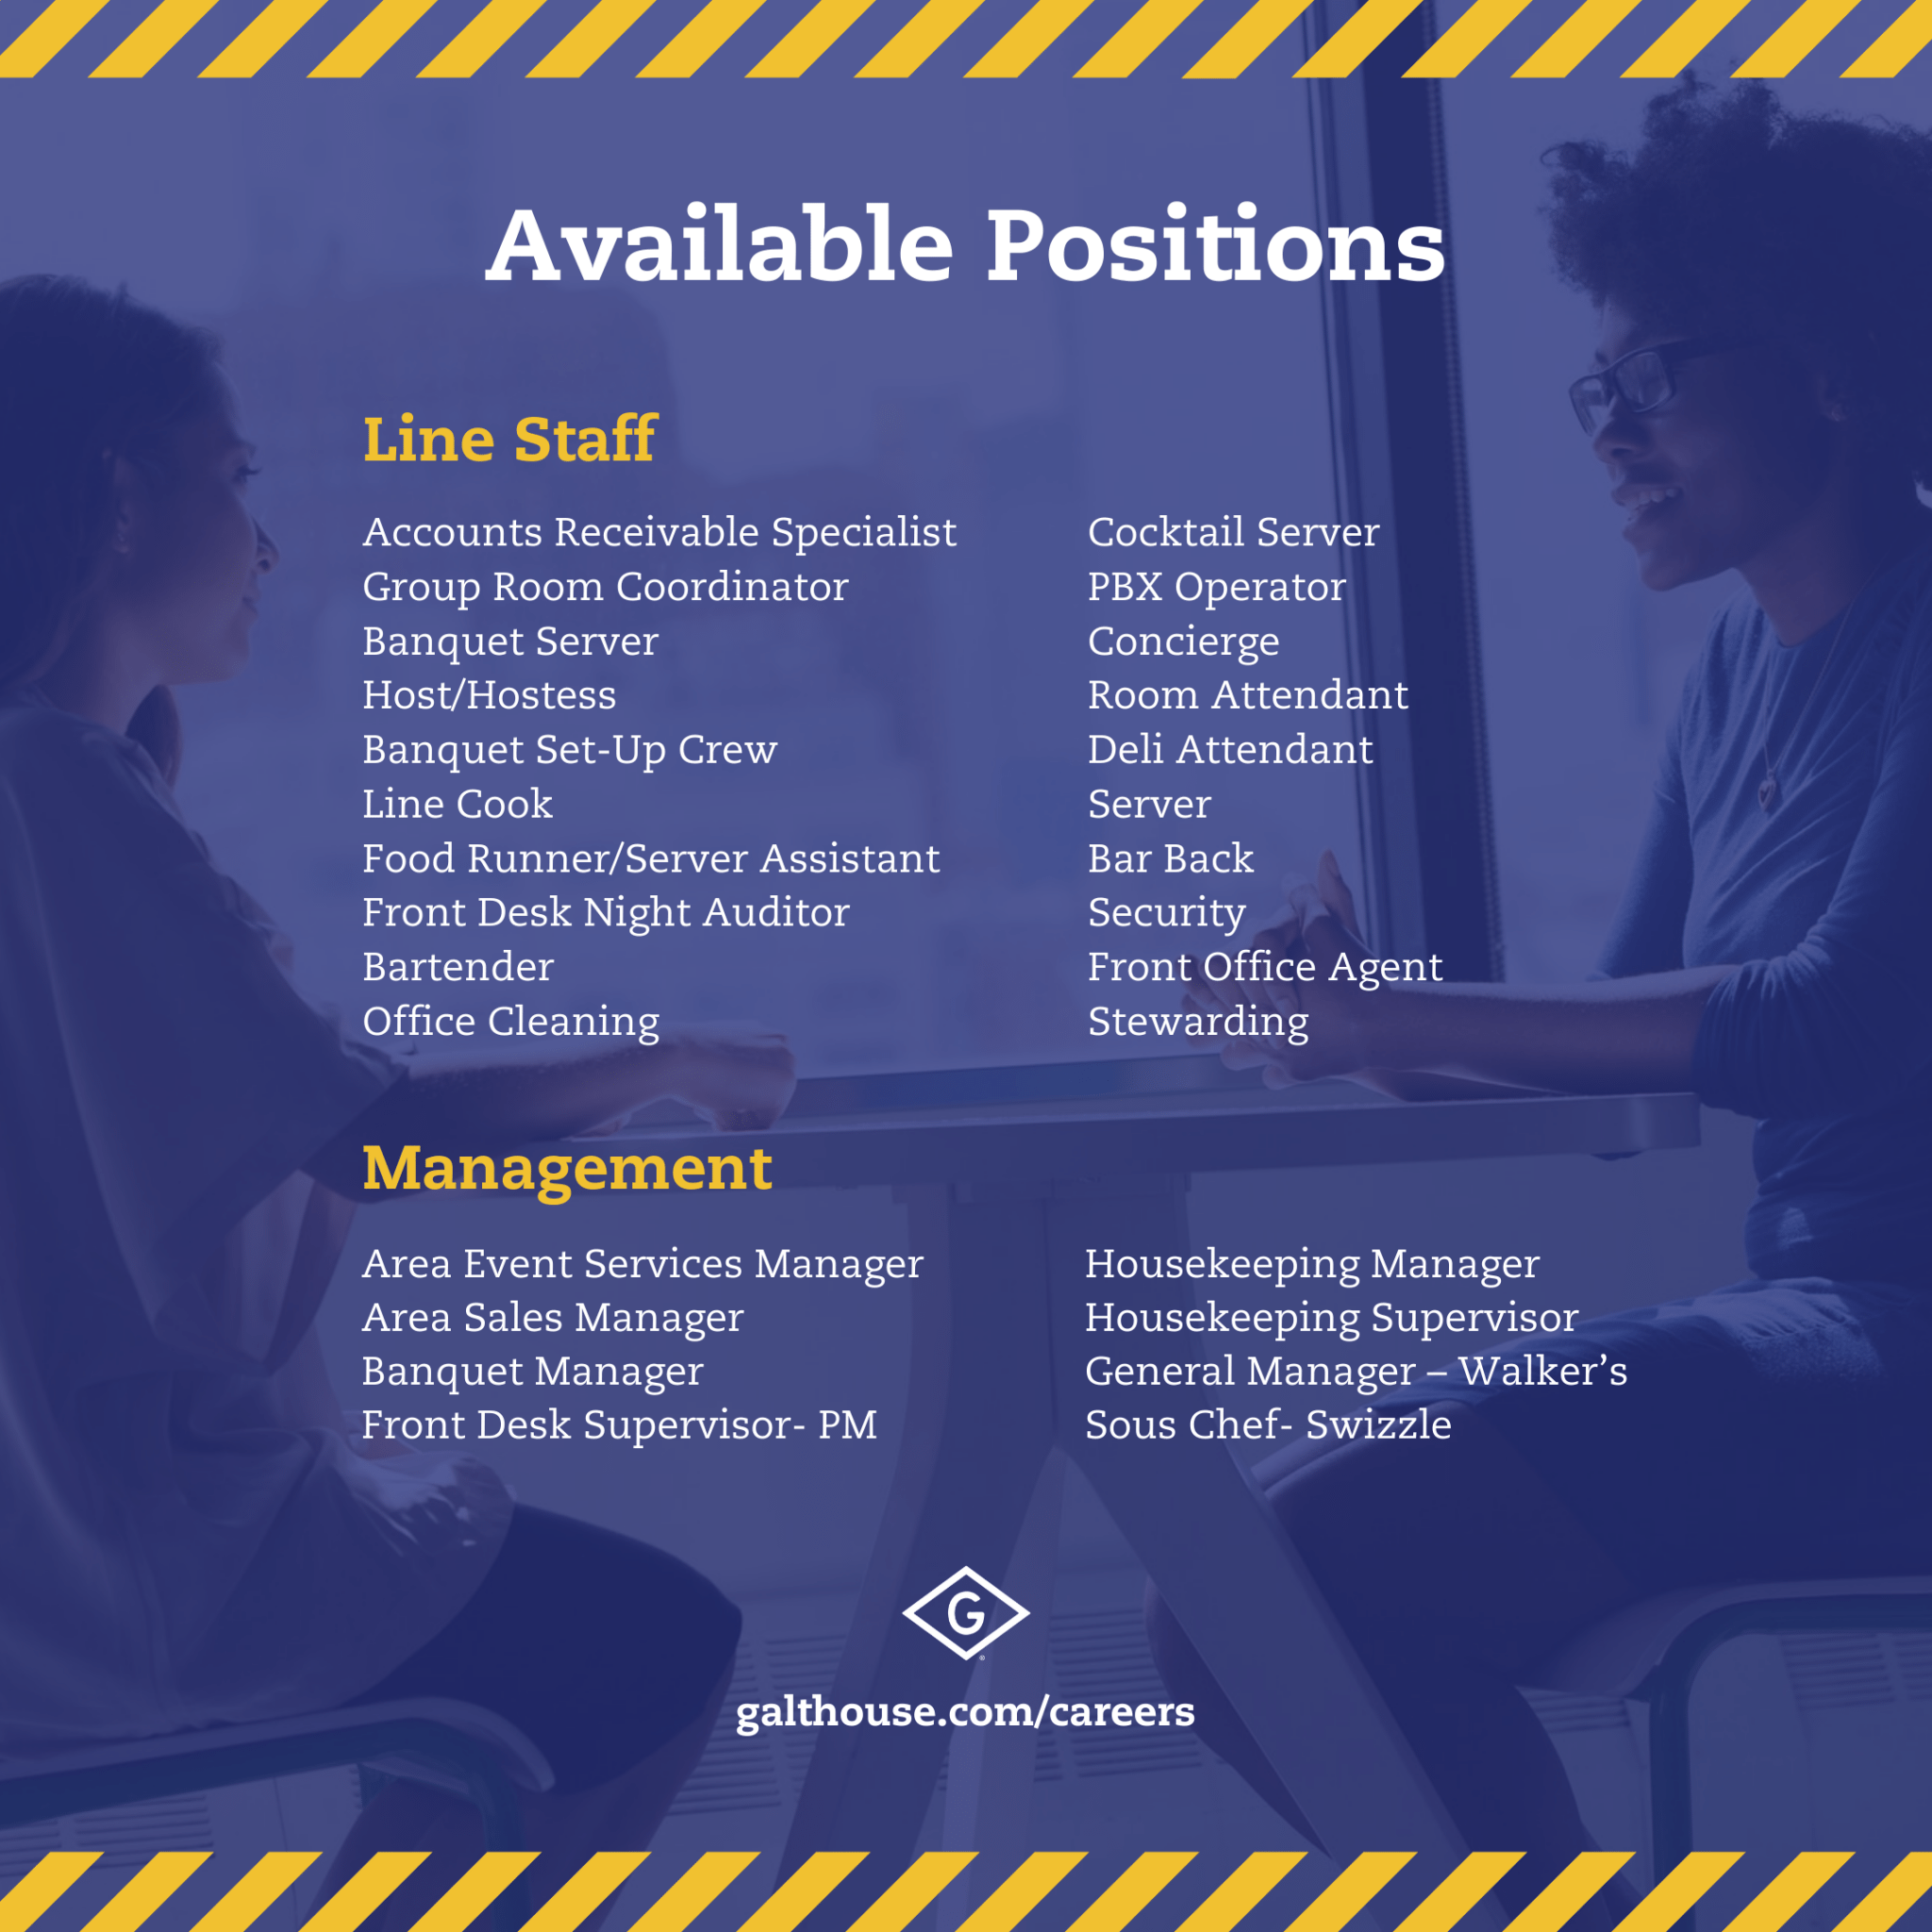 Available positions